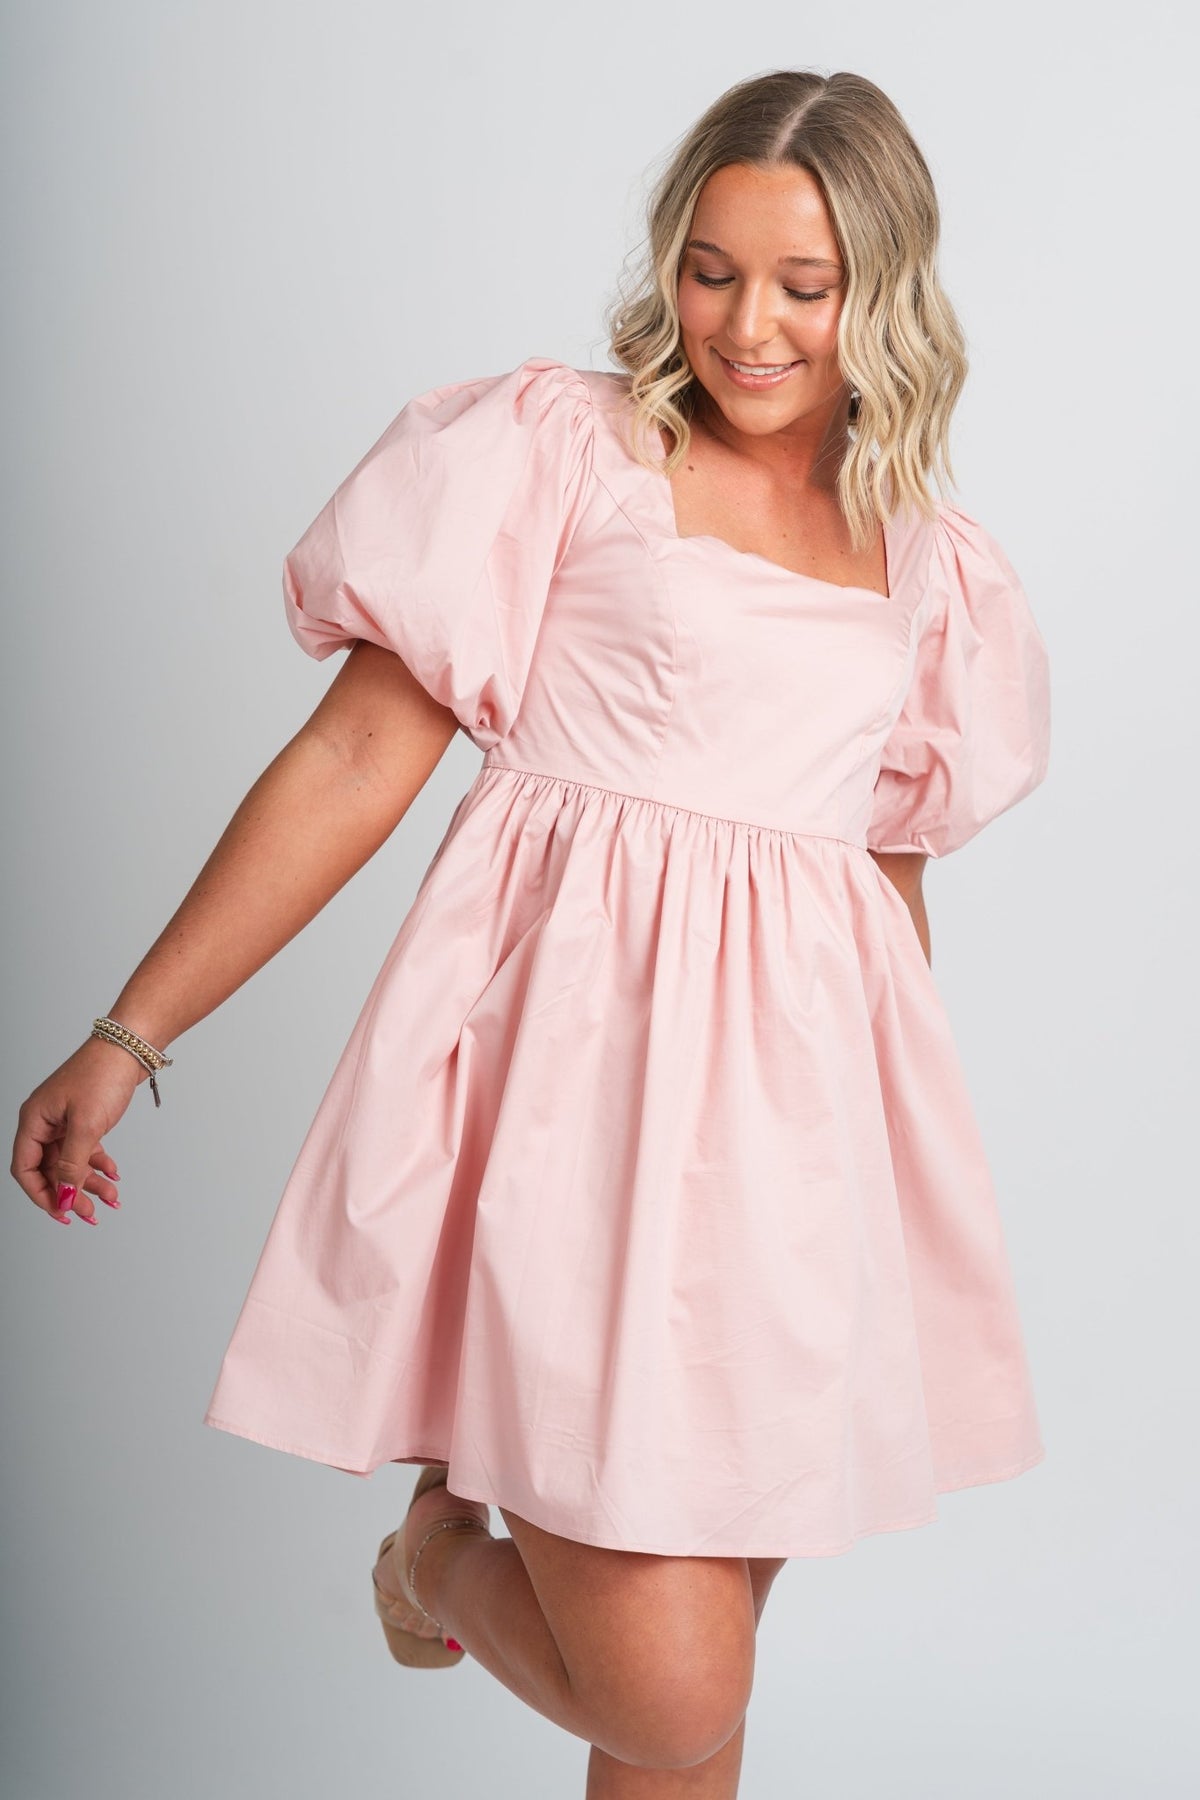 Babydoll mini dress pink - Stylish Dress - Cute Easter Outfits at Lush Fashion Lounge Boutique in Oklahoma